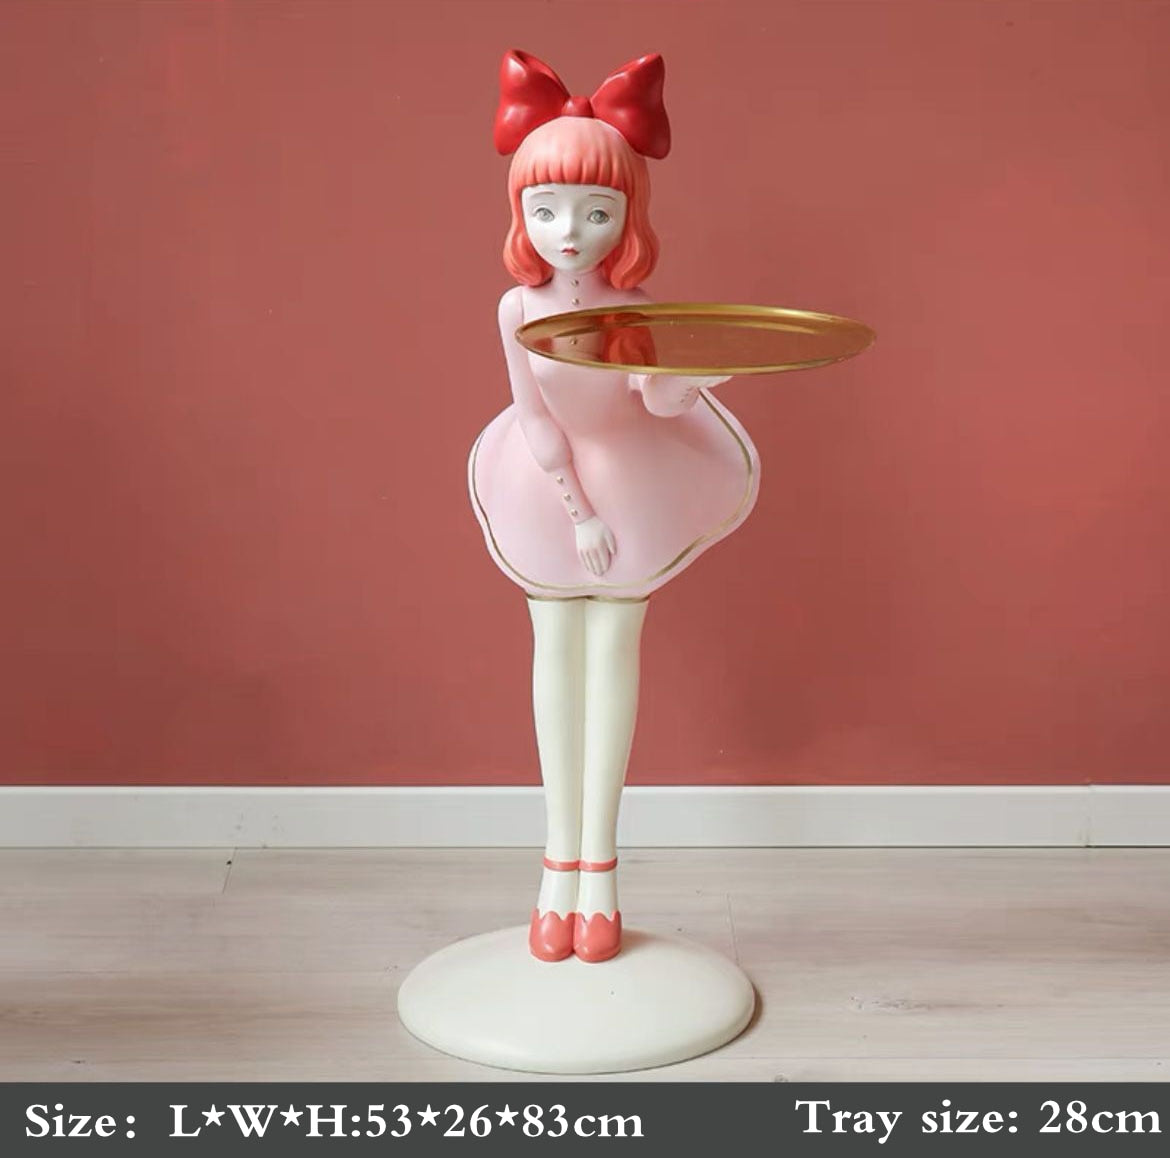 CORX Designs - Bowing Girl Big Statue With Tray - Review